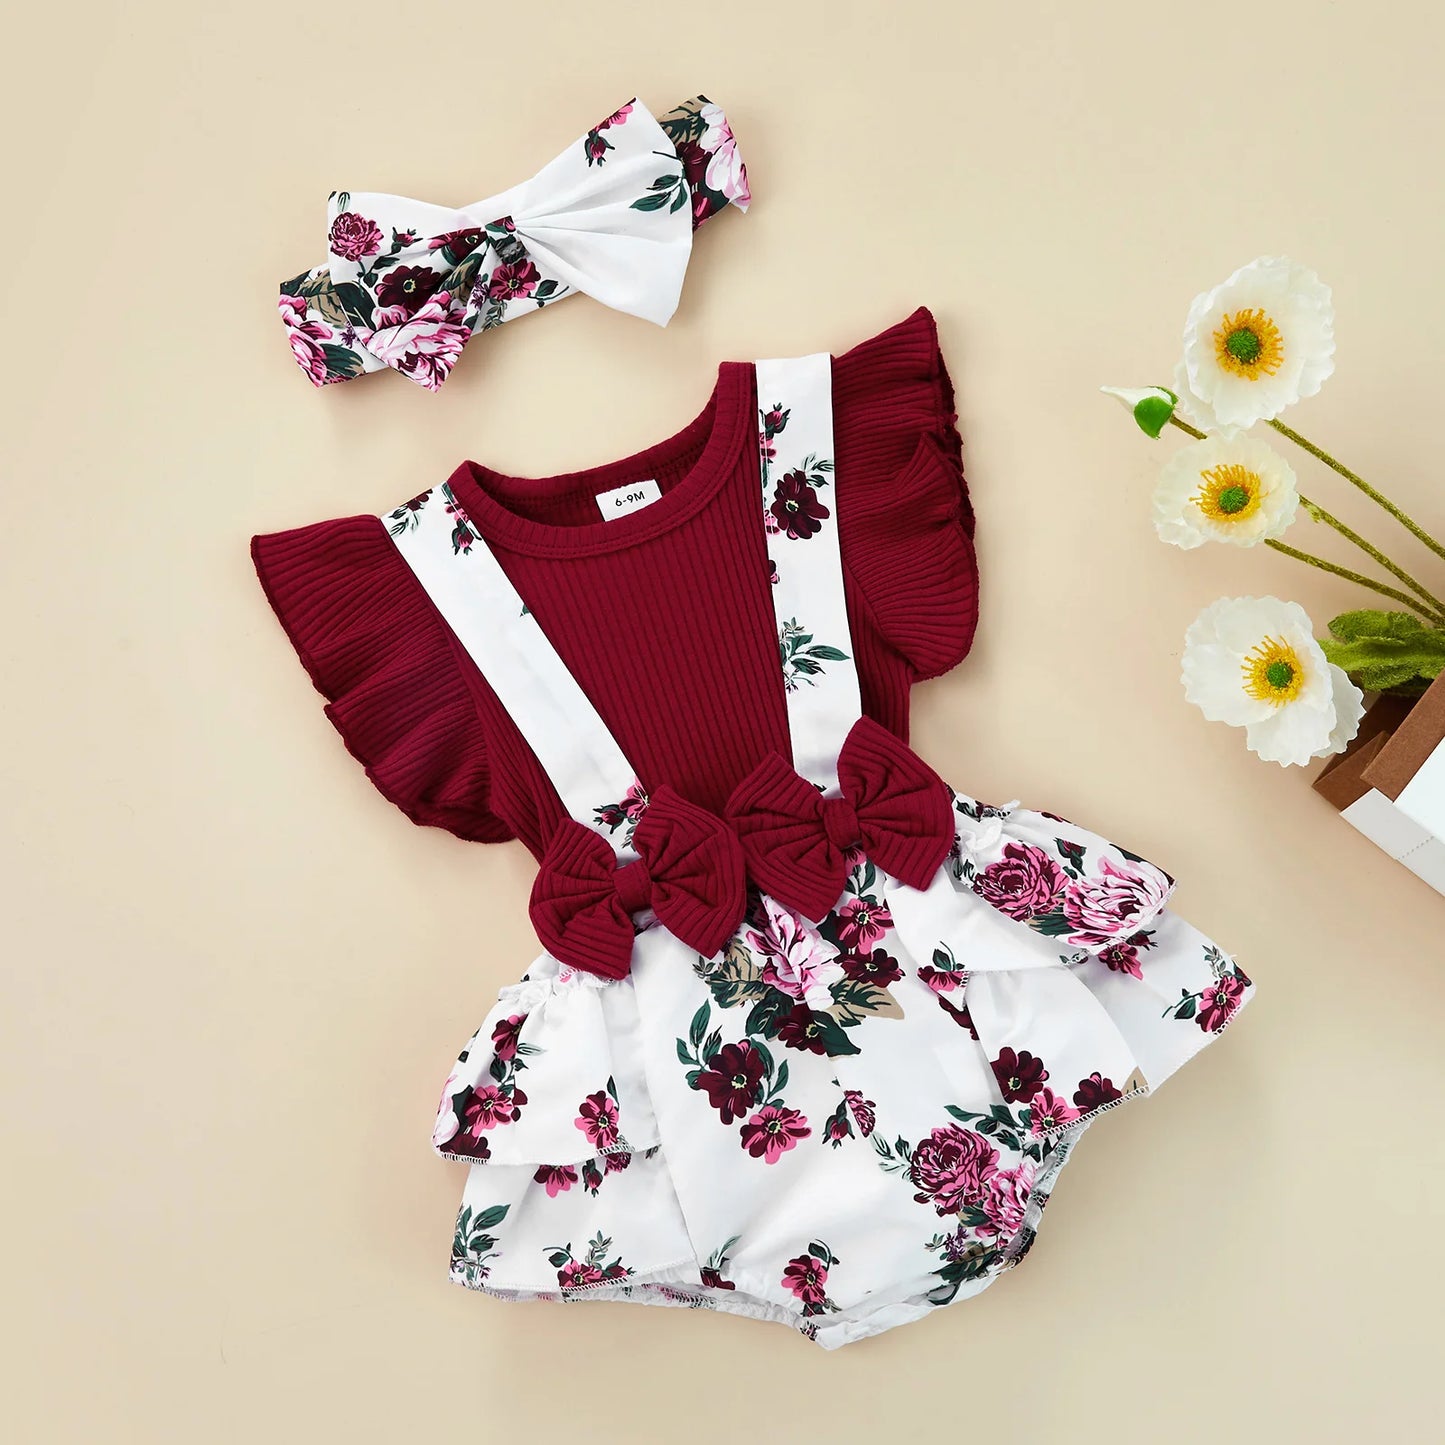 Infant Baby Girl Romper, Fly Sleeve Round Neck Ruffle Patchwork Toddler Summer Loose Jumpsuit+Head Band